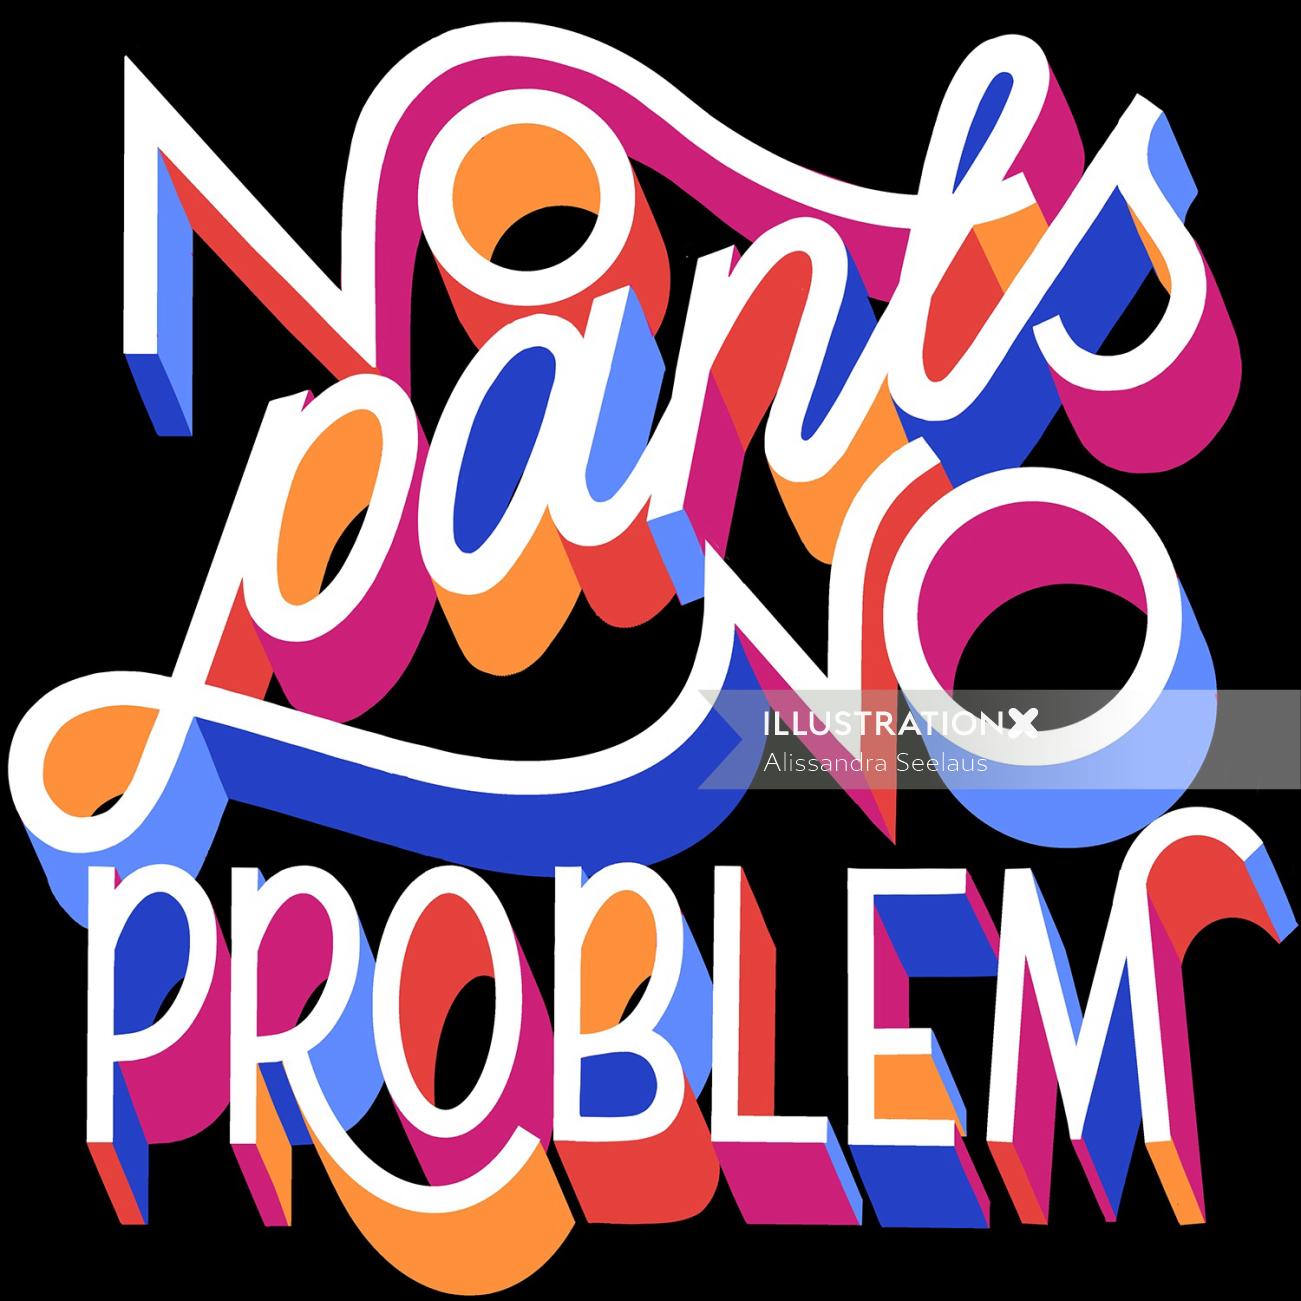 Calligraphy of "No pants No problems"